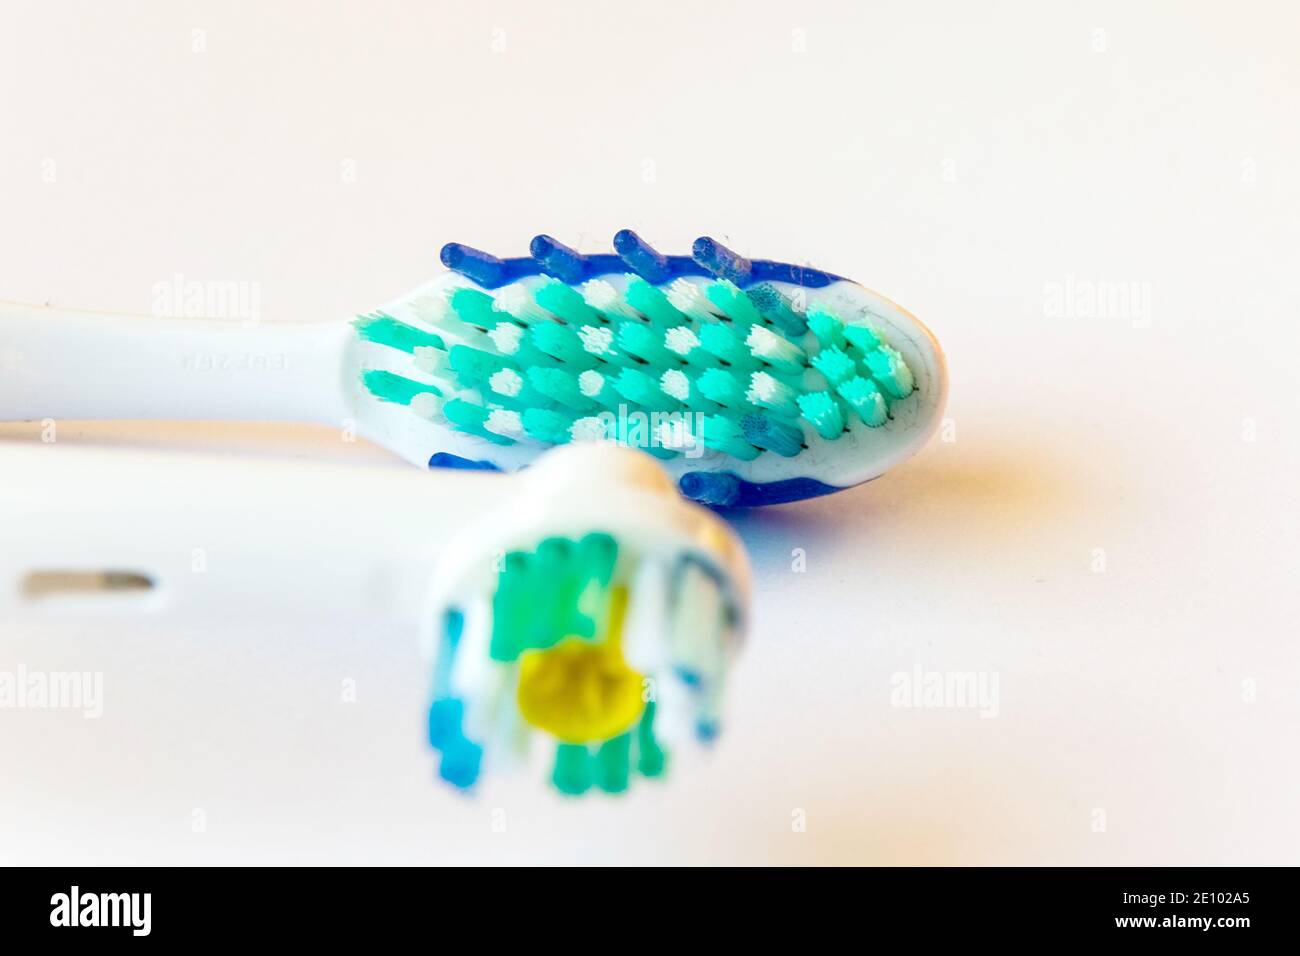 Electric and traditional toothbrushes in close-up. Toothbrush head ...